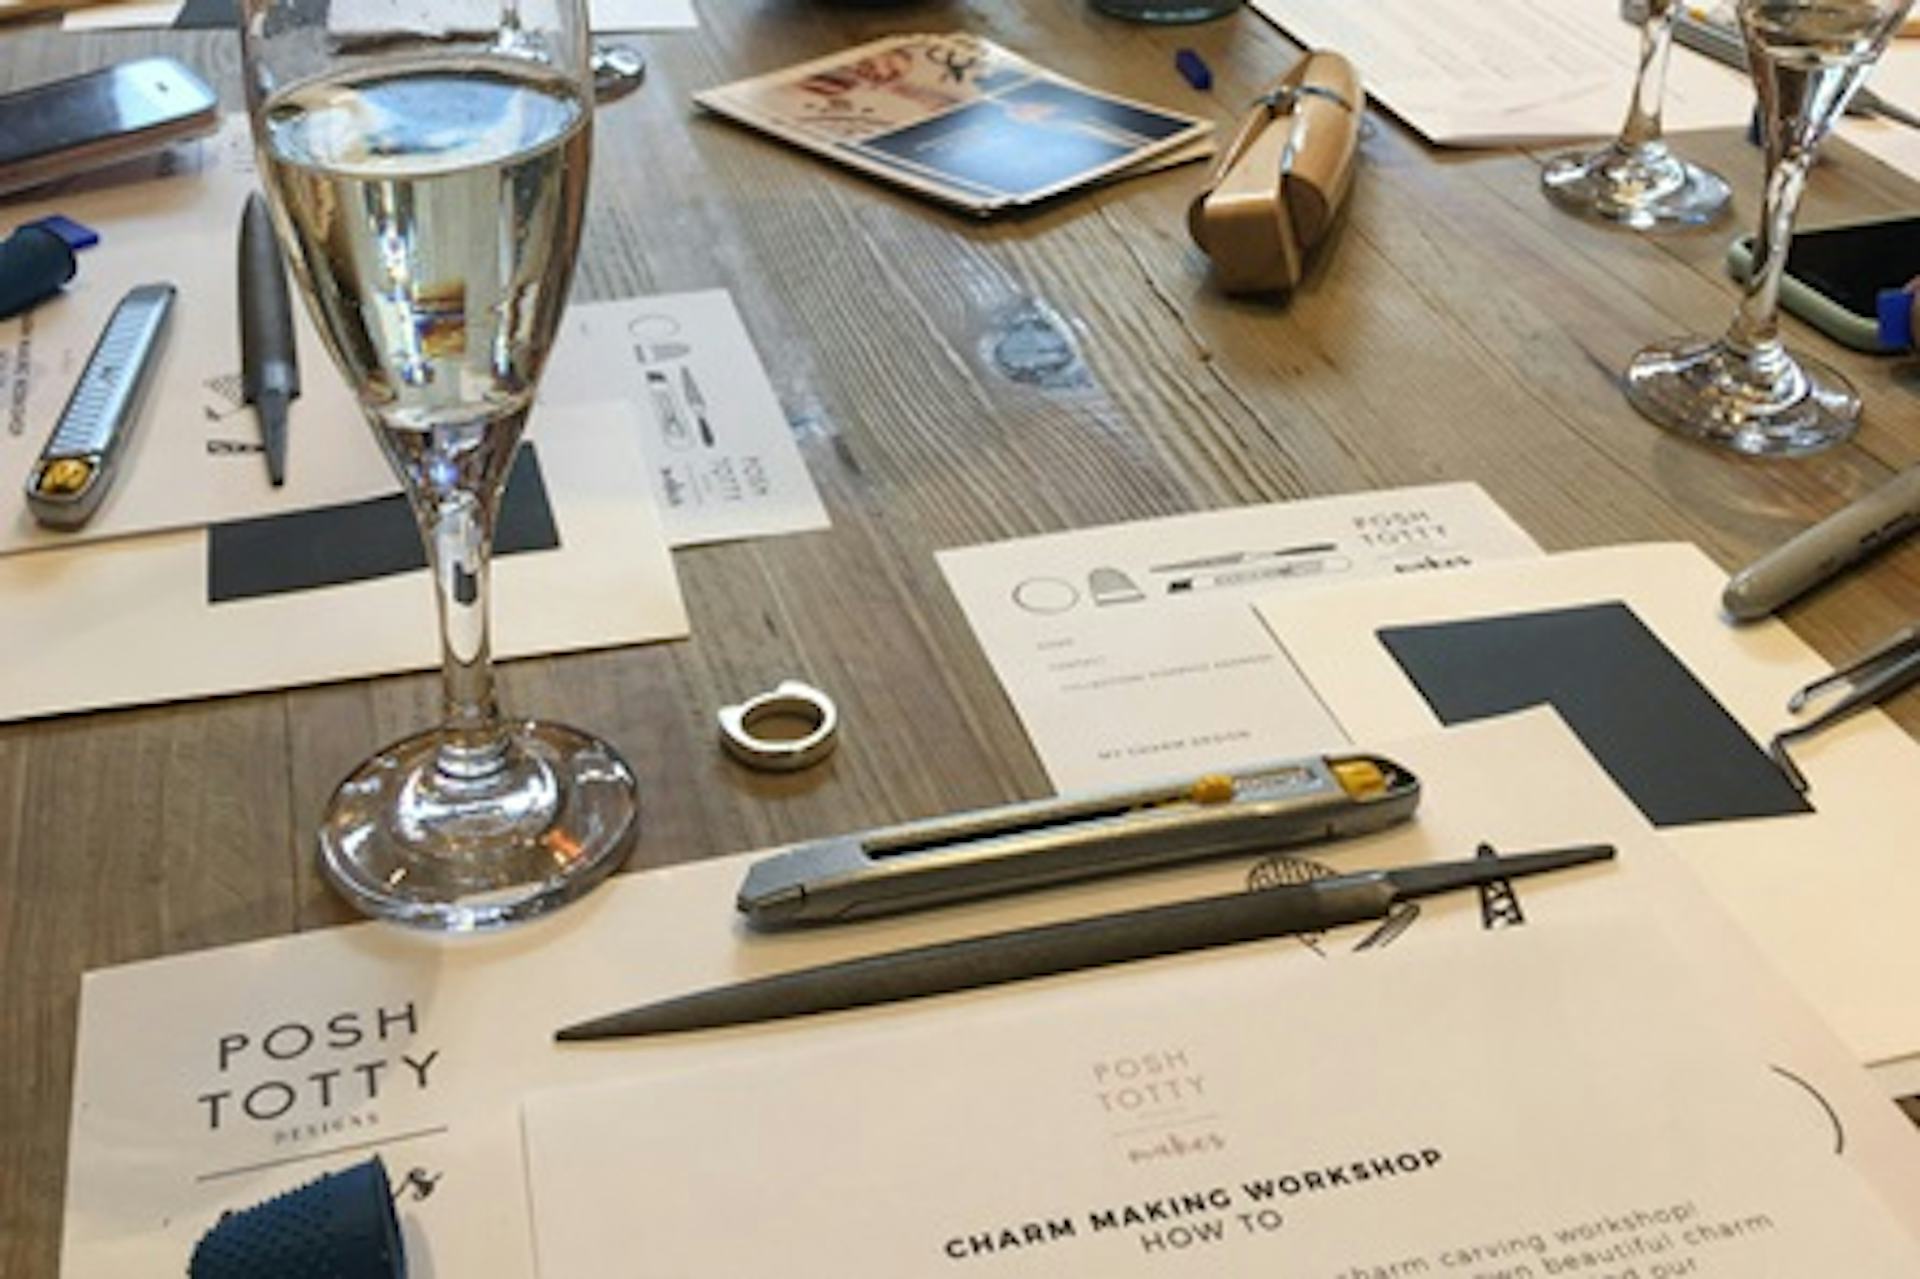 Personalised Silver Jewellery Making Workshop with Prosecco at Posh Totty Designs